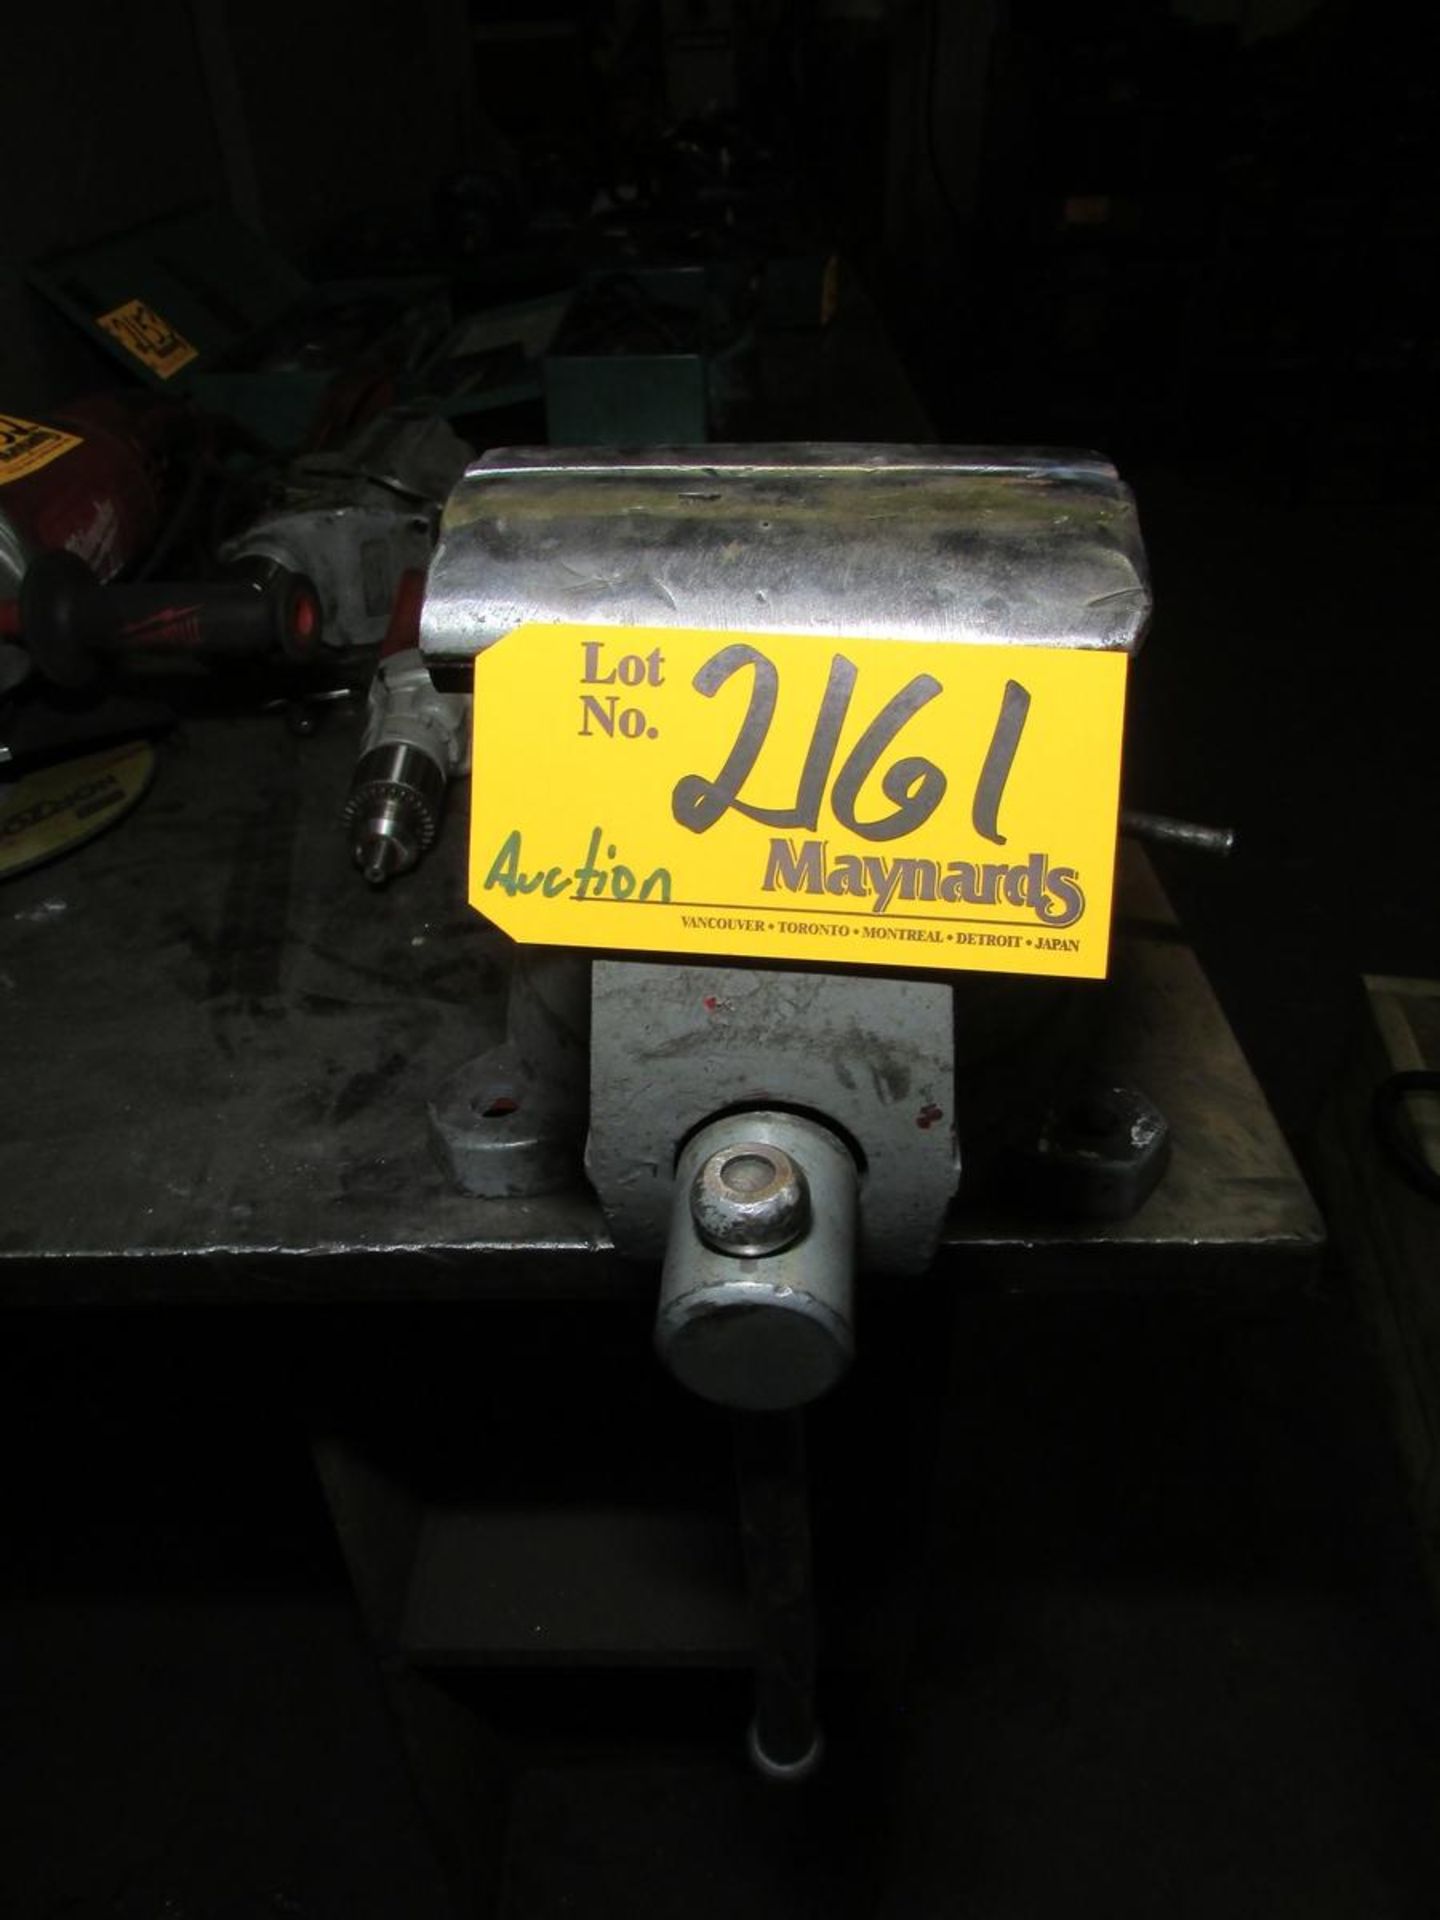 6" Bench Vise - Image 2 of 3